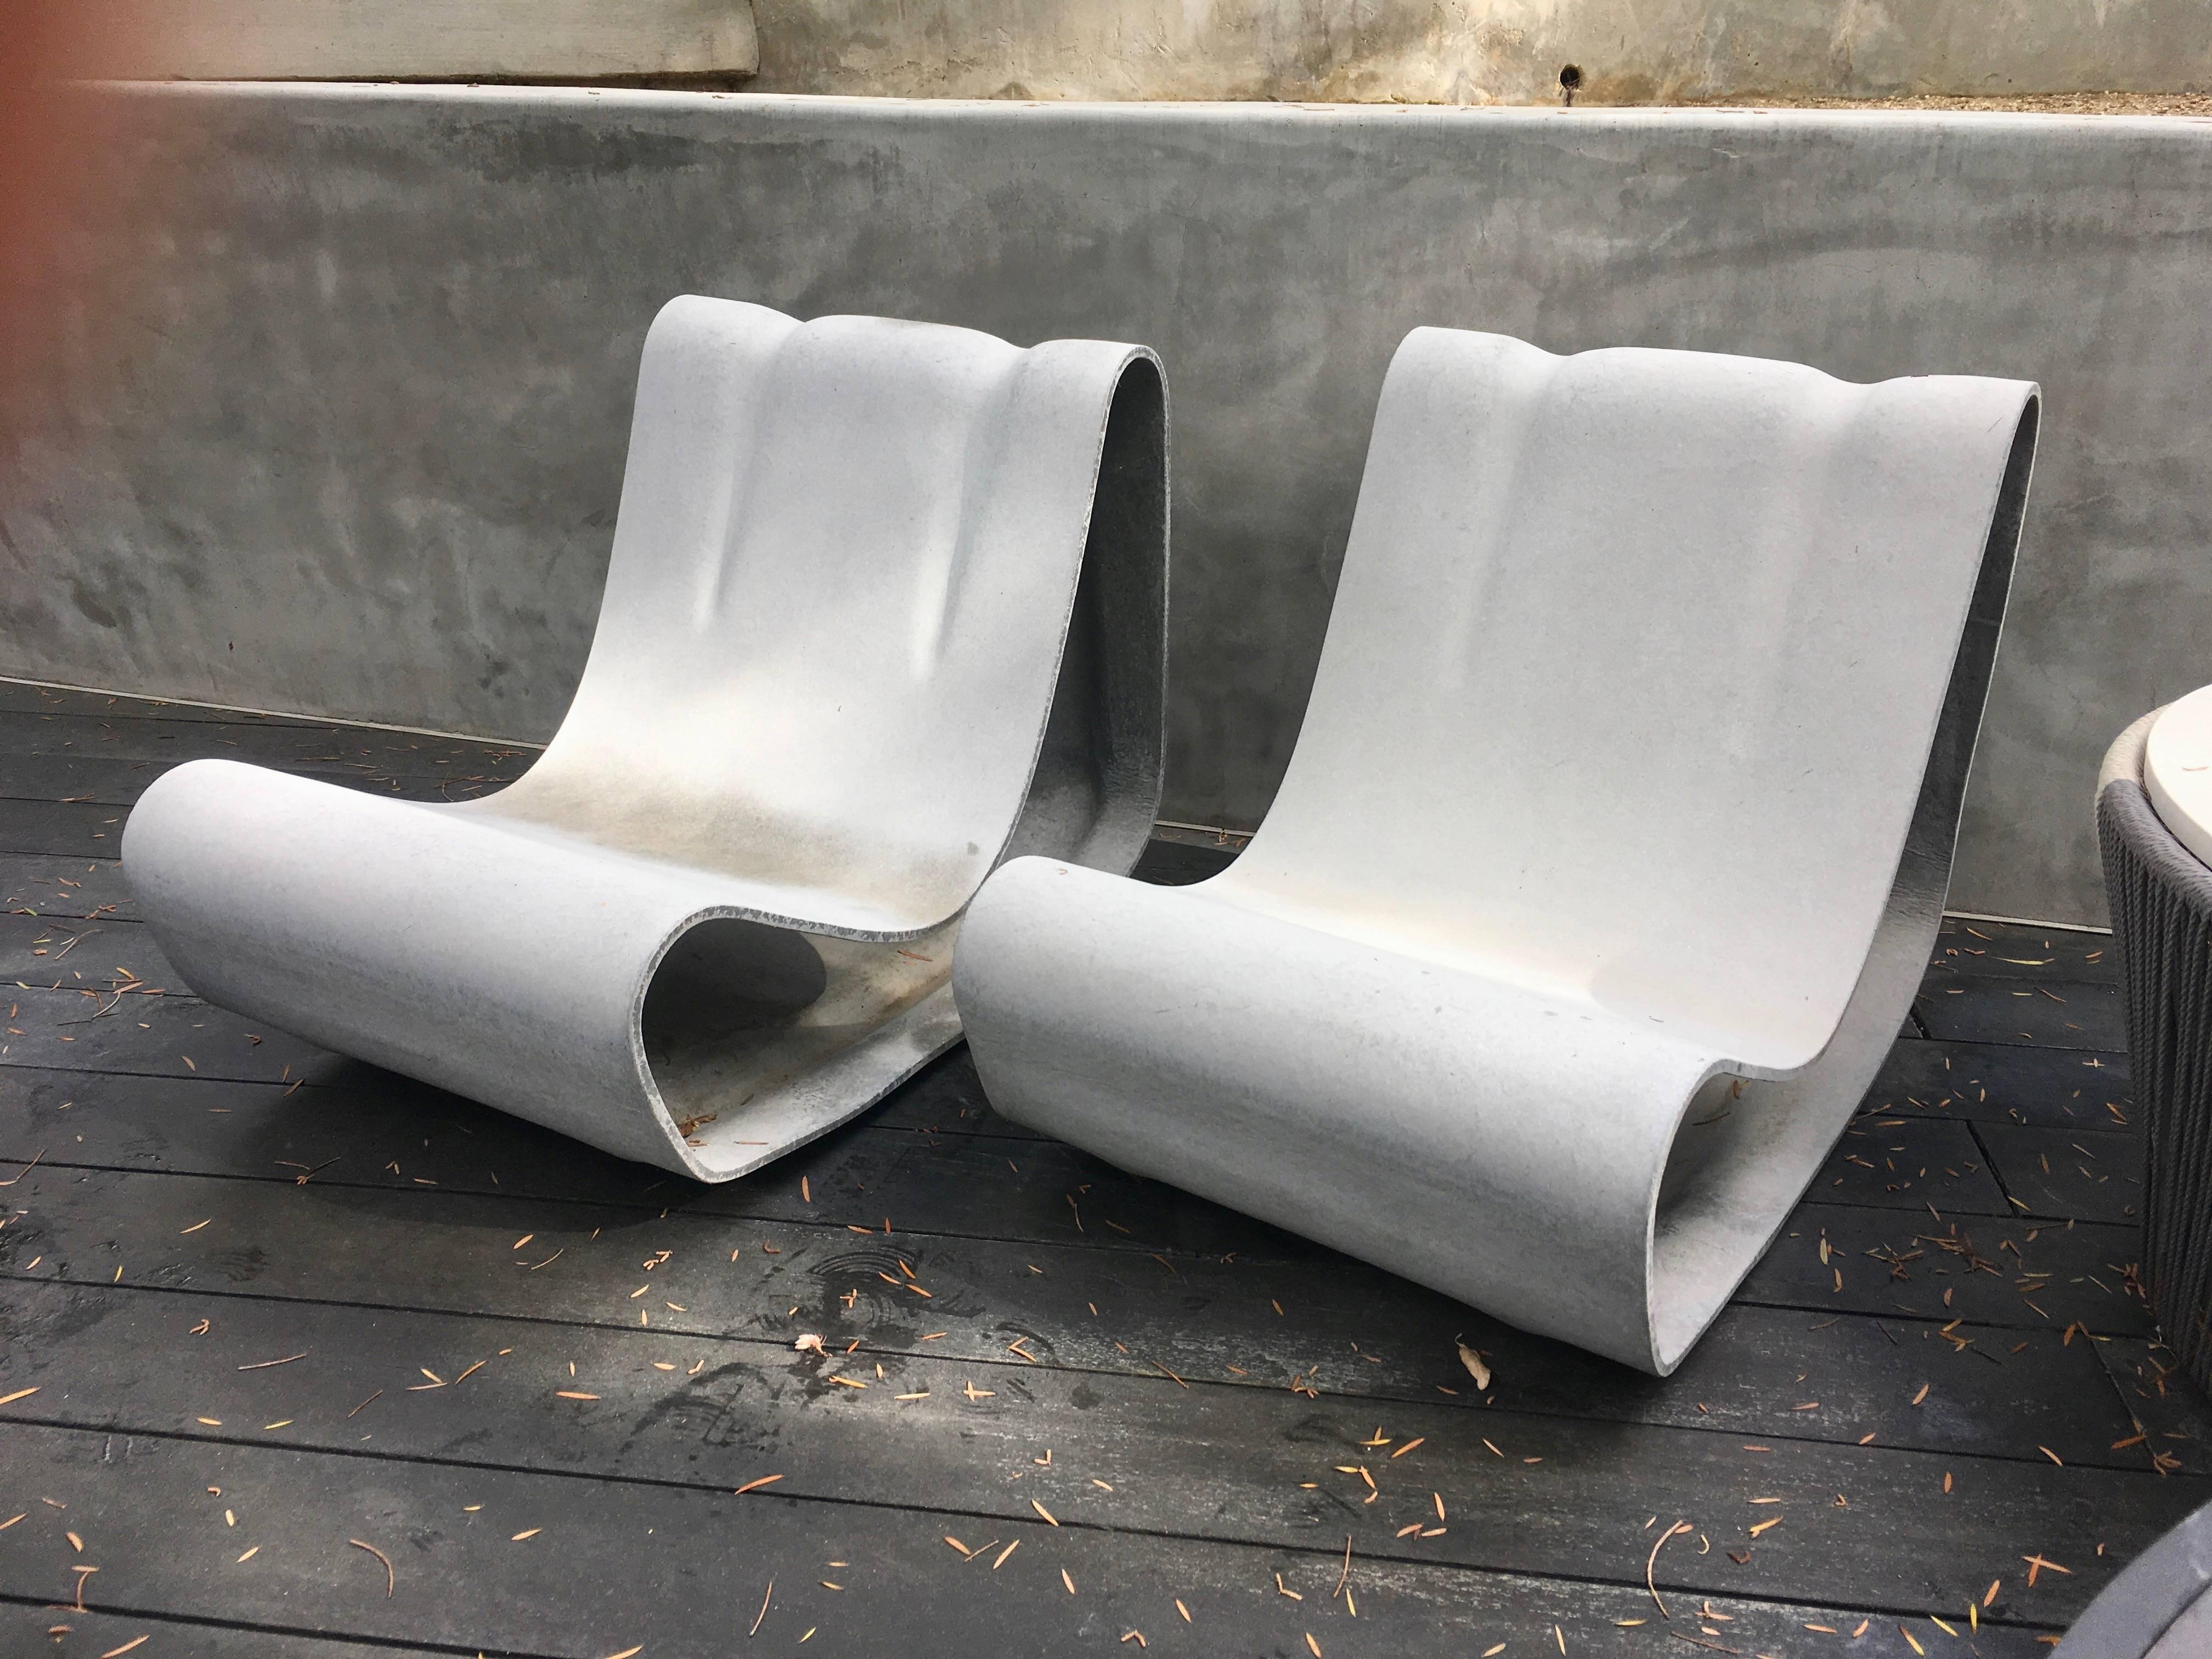 Fantastic cement chair by Swiss designer Willy Guhl for Eternit. Brand new. Hand mage in Switzerland. One of the most iconic chairs ever designed. Priced as a single chair. Multiple chairs available.